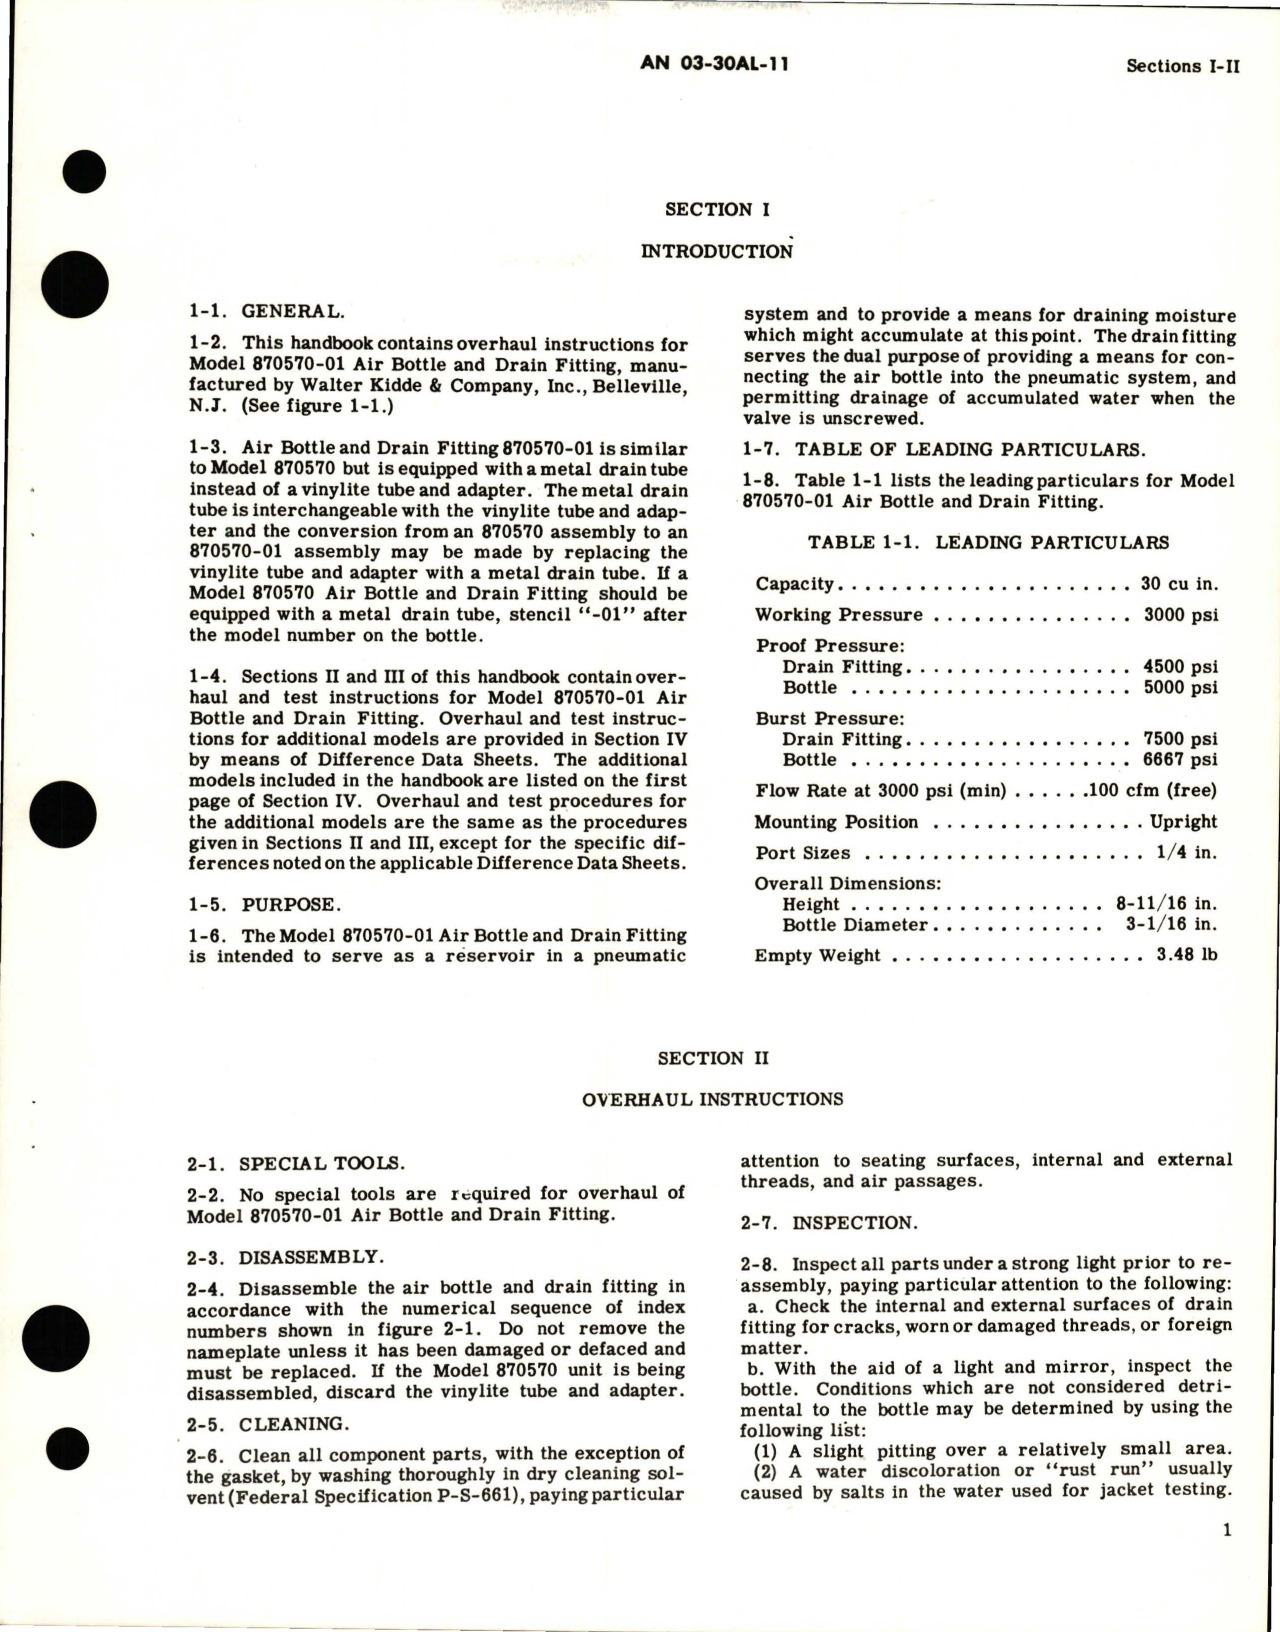 Sample page 5 from AirCorps Library document: Overhaul Instructions for Air Bottles and Drain Fittings 